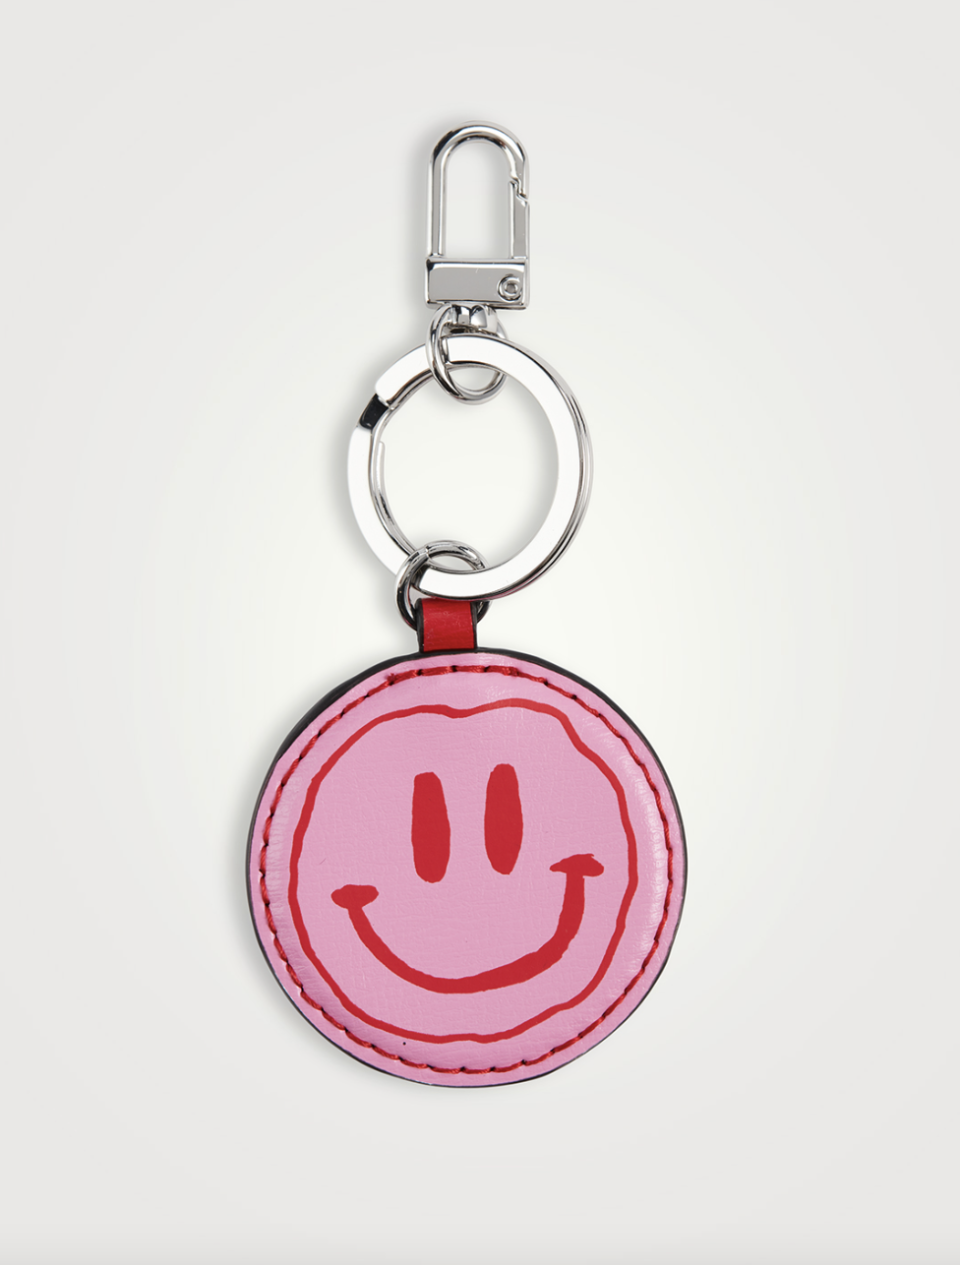 Ganni Smiley Leather Keychain in pink and red (Photo via Holt Renfrew)